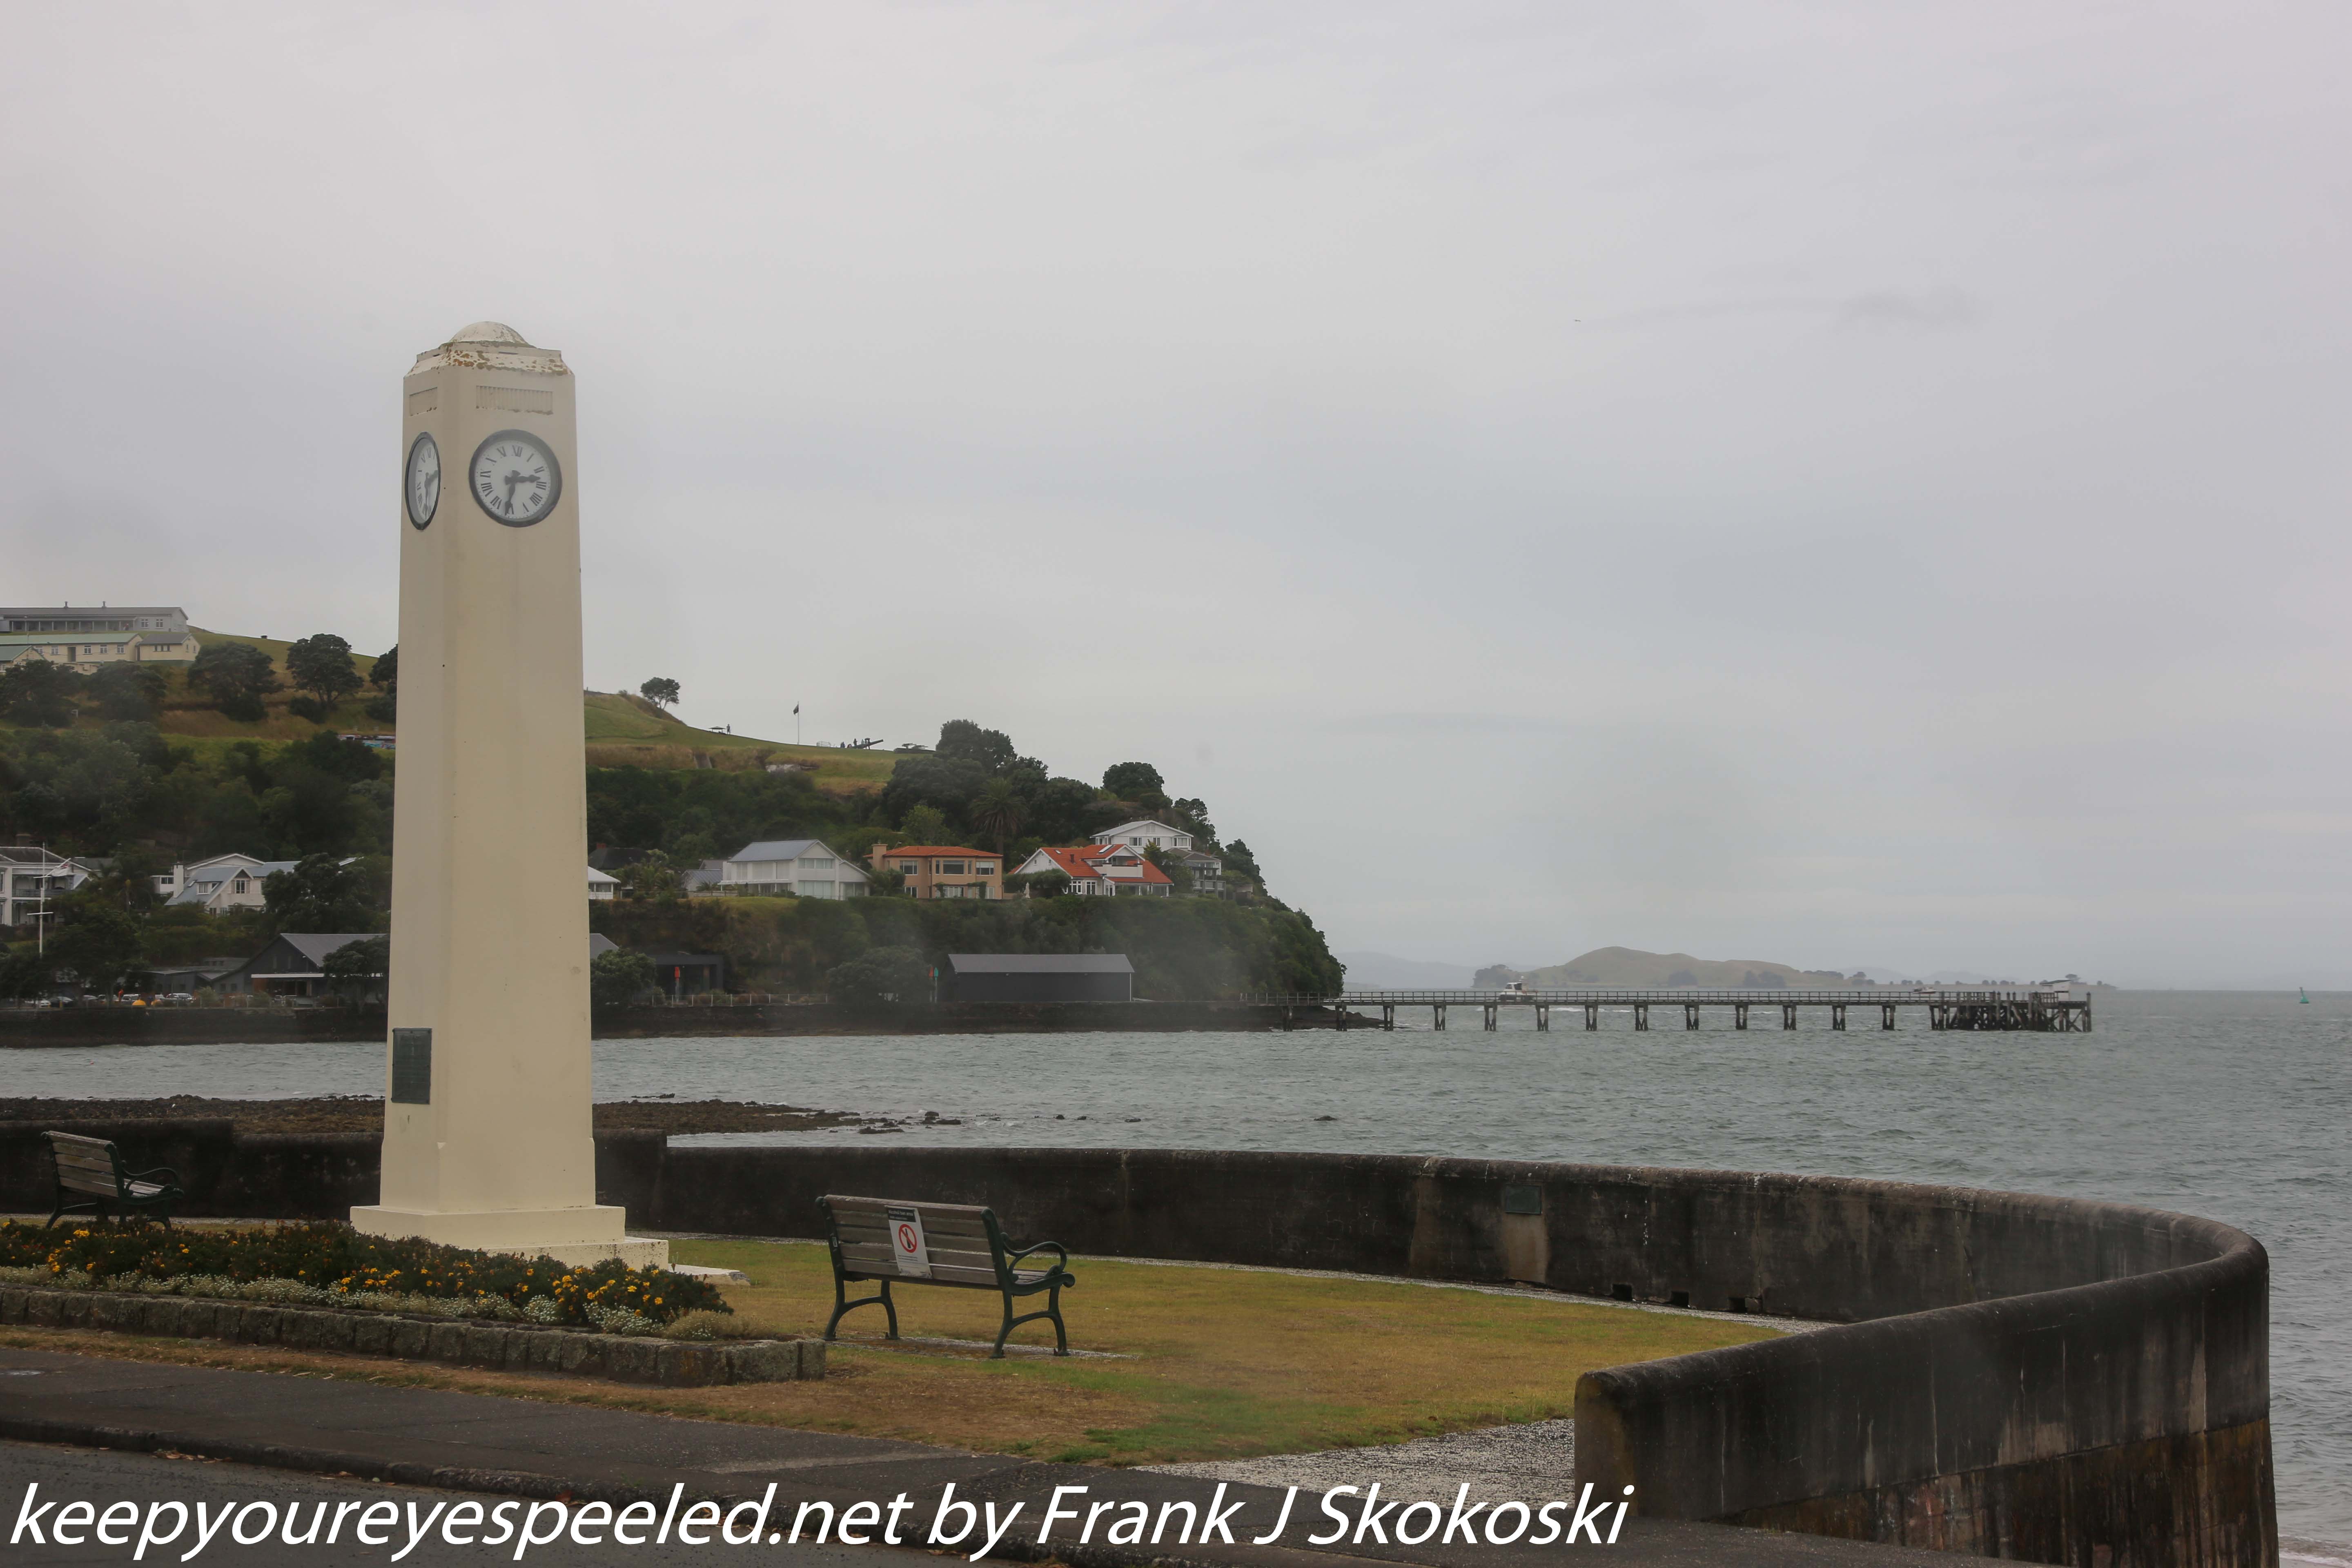 New-zealand-Day-Eighteen-Auckland-afternoon-cruise-February-23-15-of-46